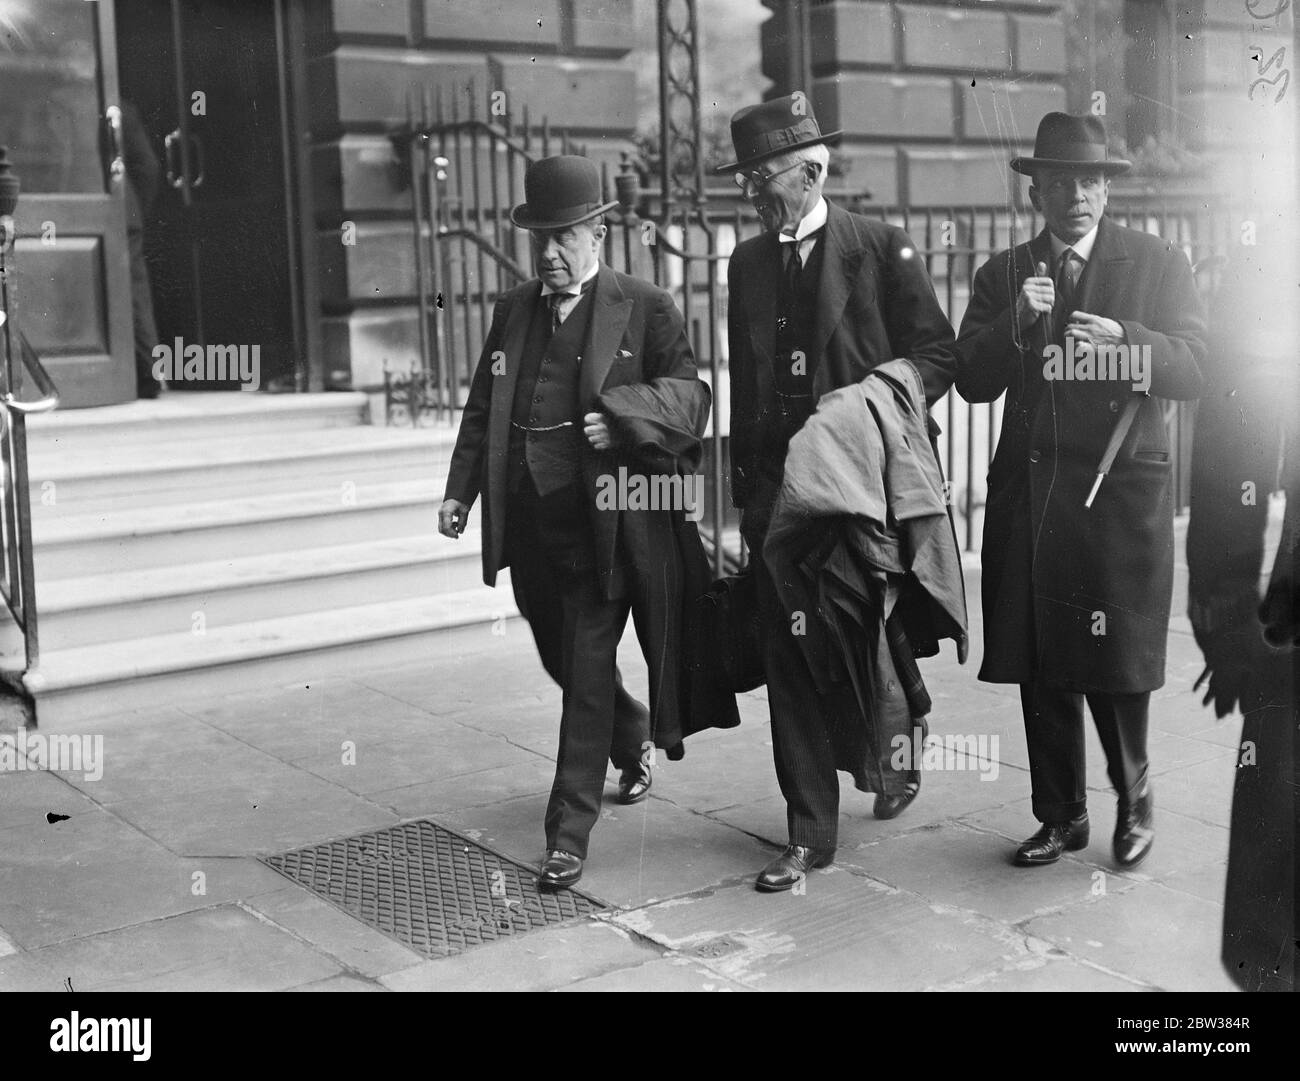 Mr Baldwin at the opening of new London library building . Mr Stanley Baldwin attended the opening of the new , London Library building in St James' Square . Photo shows , Mr Baldwin and the Rt Hon H A LFisher arriving for the ceremony . 13 April 1934 Stock Photo